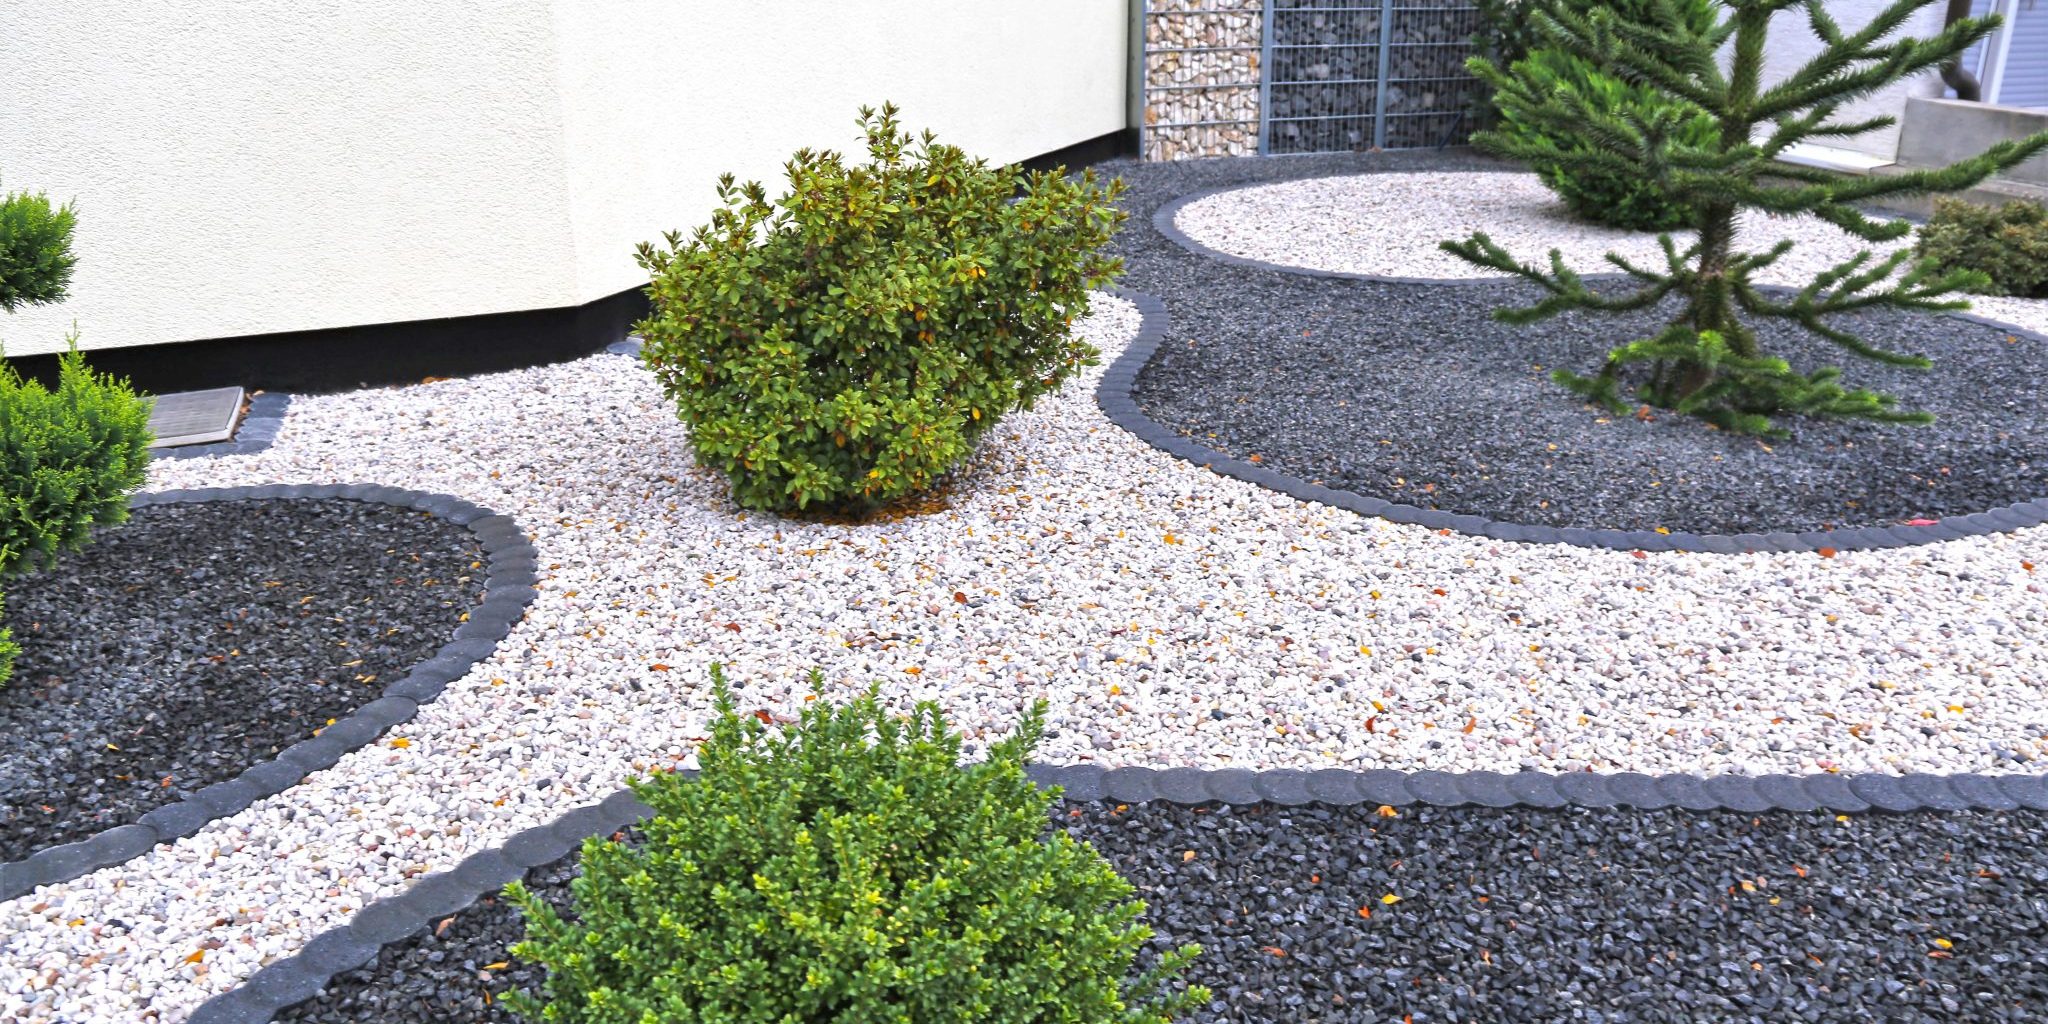 Landscaping With Decorative Rock, Landscaping With Rocks